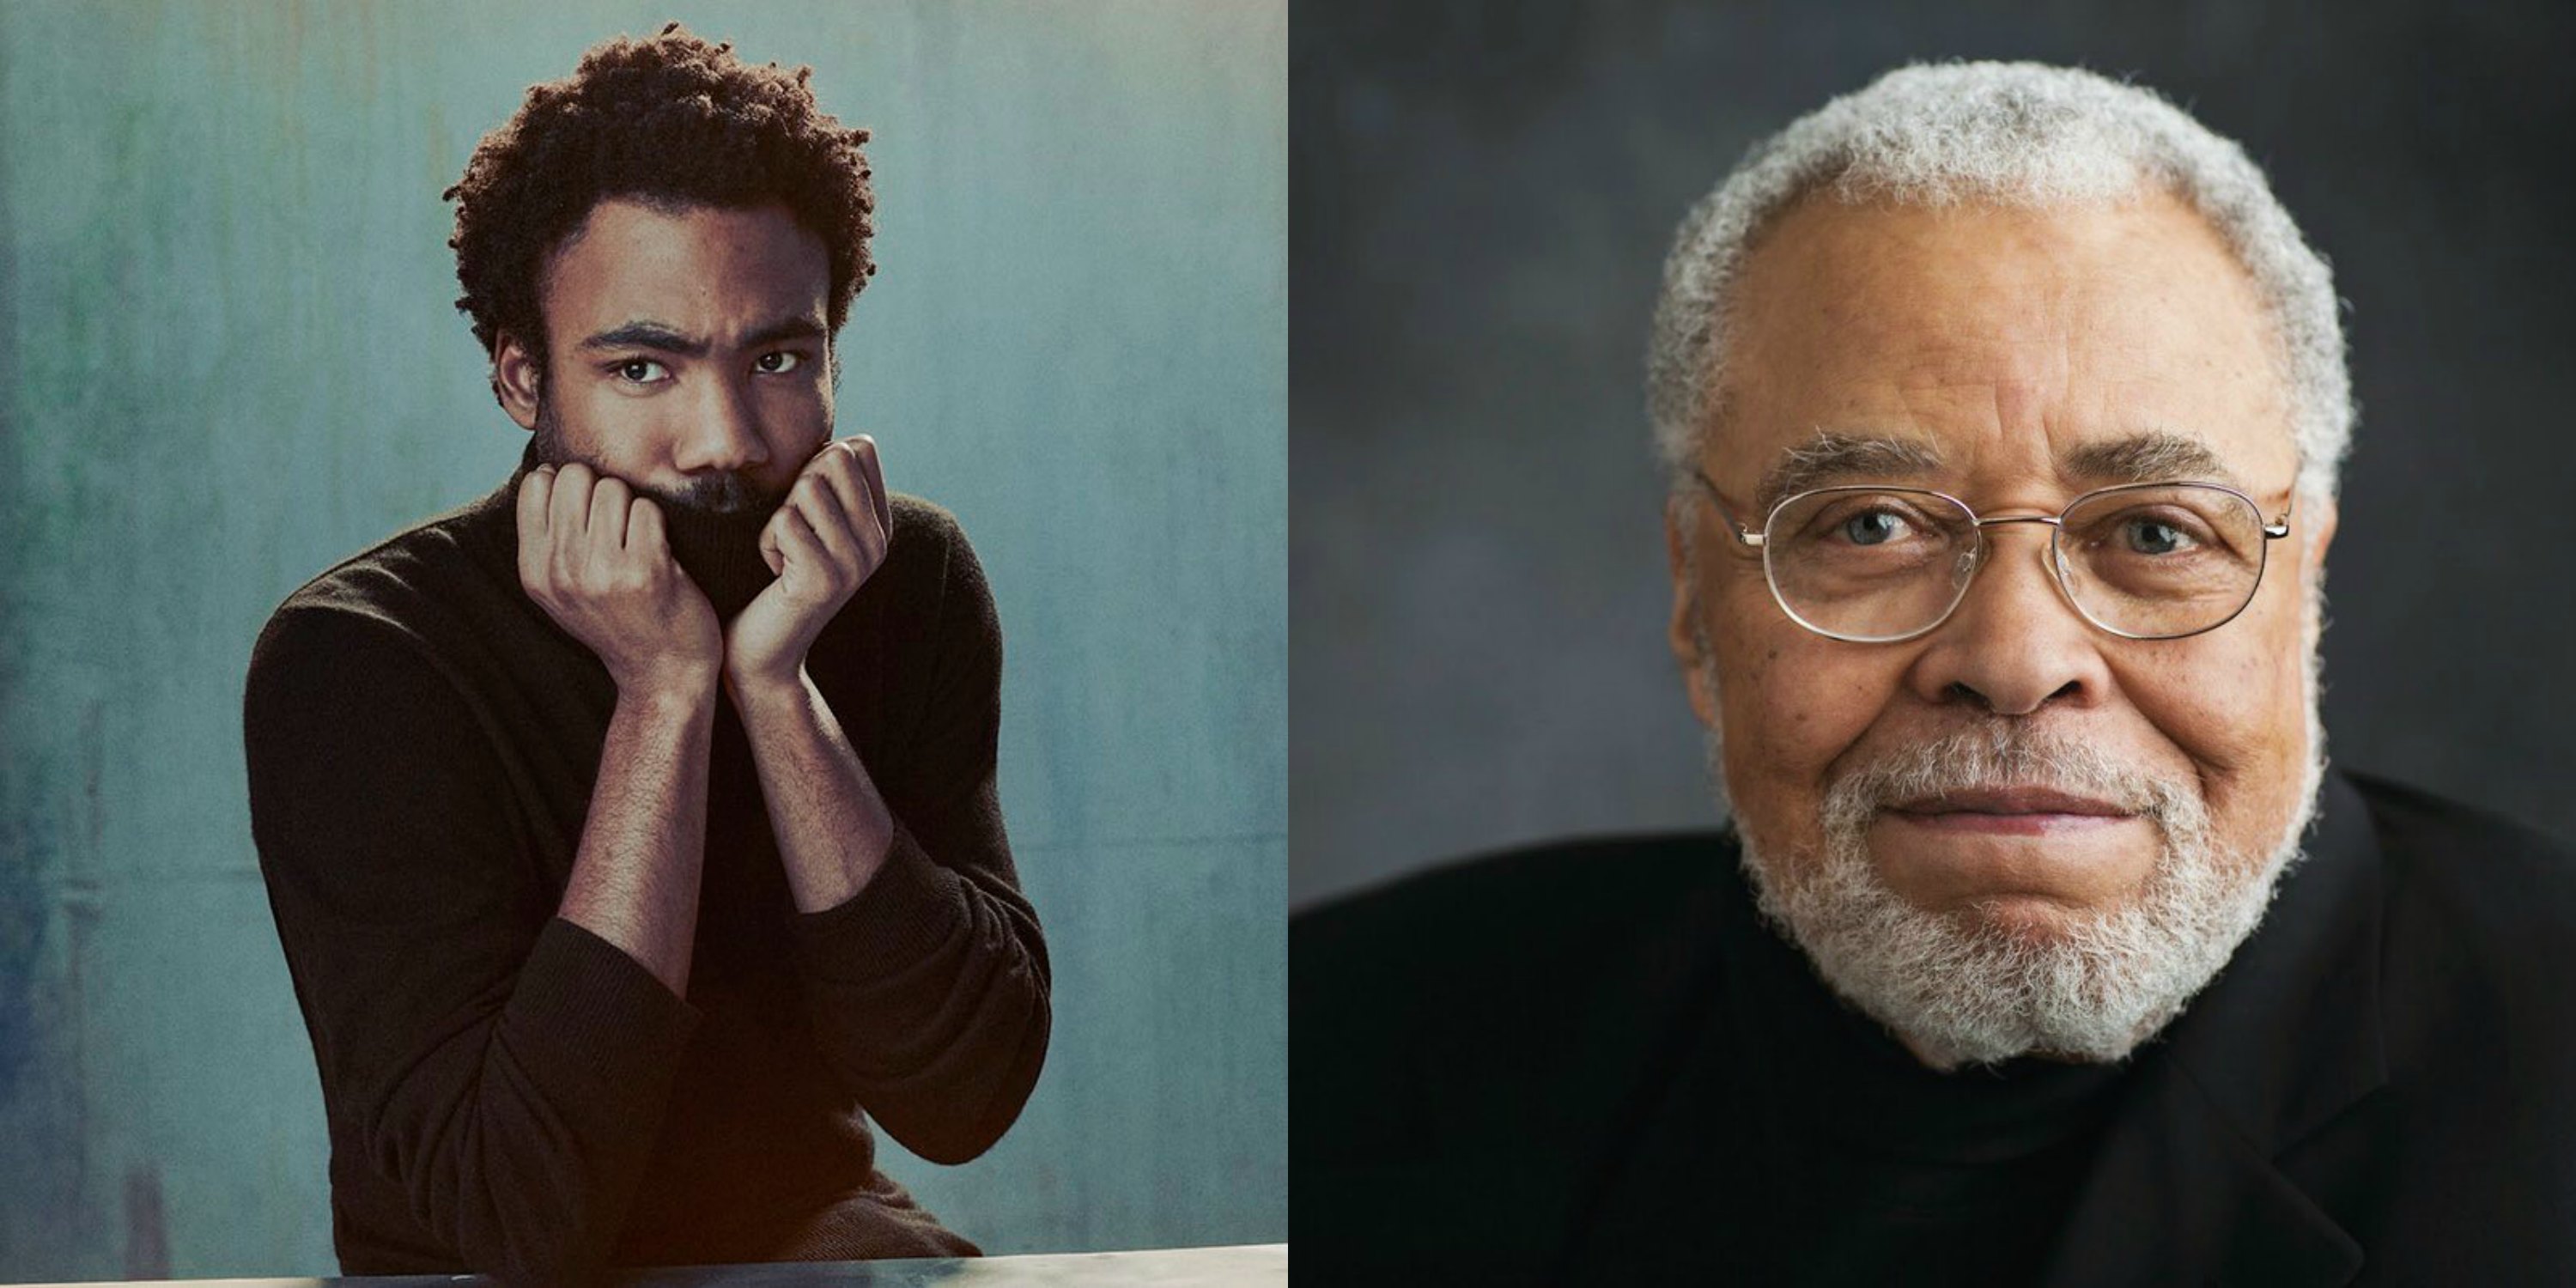 Donald Glover Cast as Simba in "The Lion King," James Earl Jones Returning as Mufasa